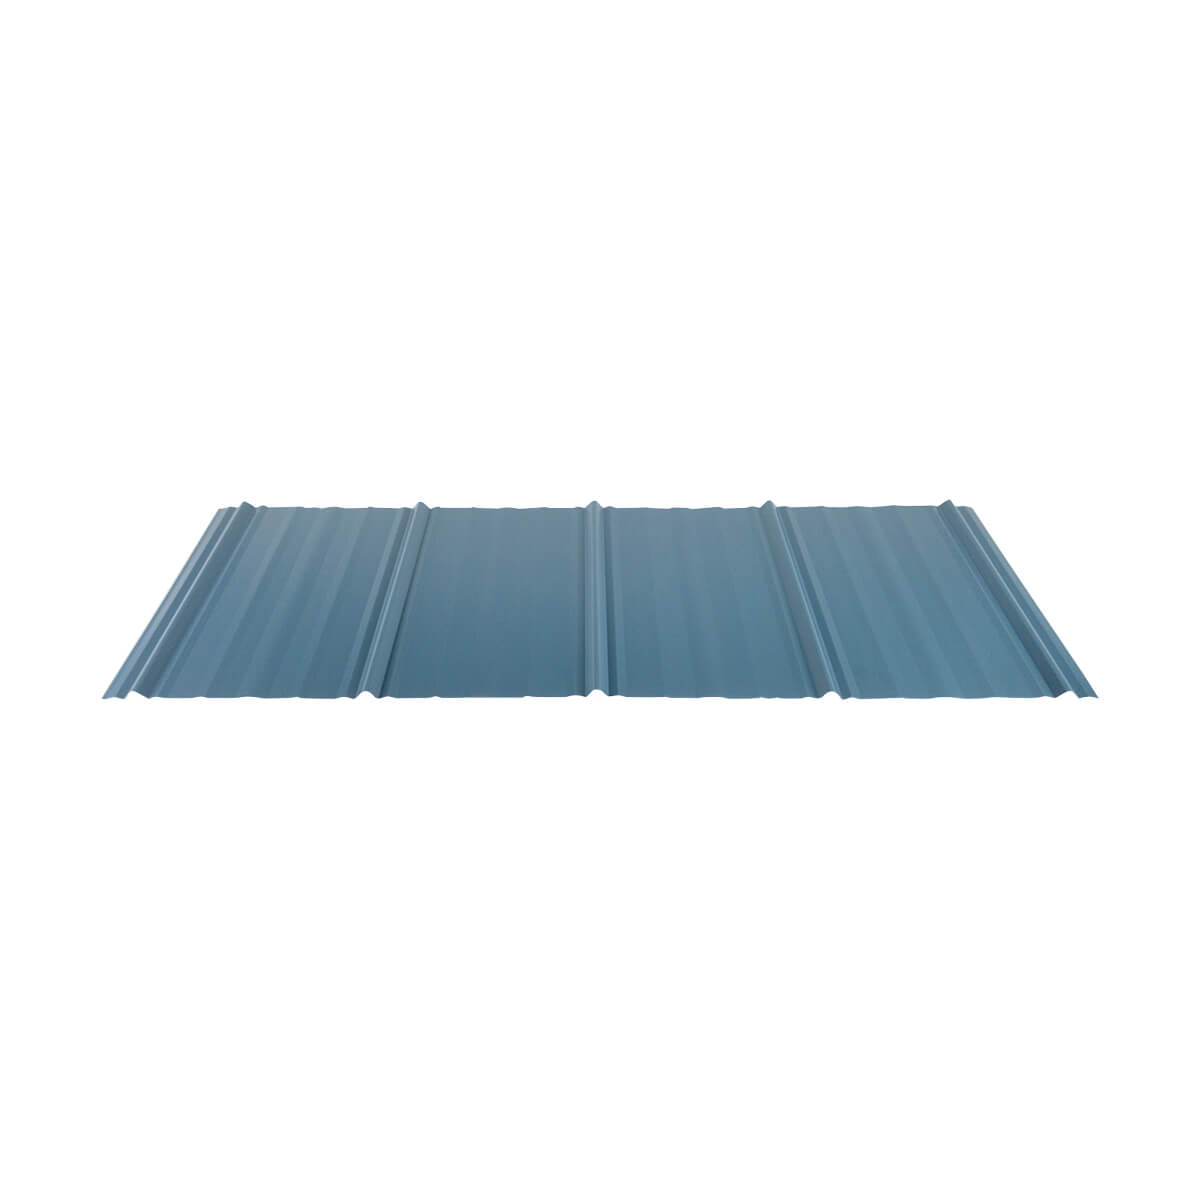 WeatherShield 1 Metal Sheets or Panels - 32-in x 16-ft